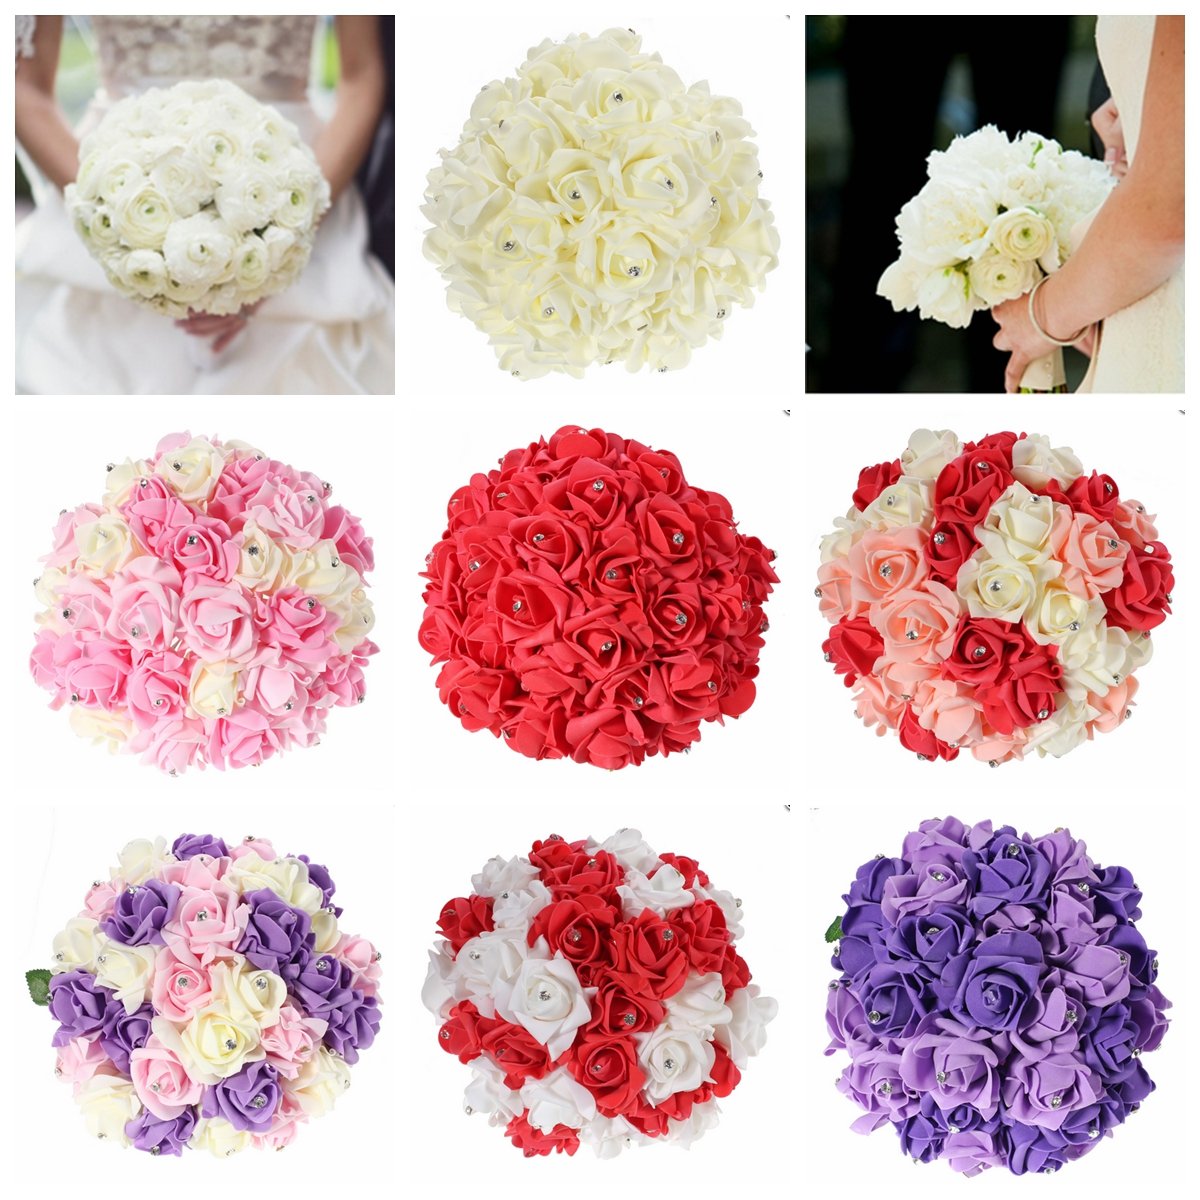 

30 Heads Colourfast Foam Crystal Artificial Roses Flower Home Wedding Bride Bouquet Party Decoration, White blue white black/orange black/red red black/white black/red/green purple black/red/blue black/green/red